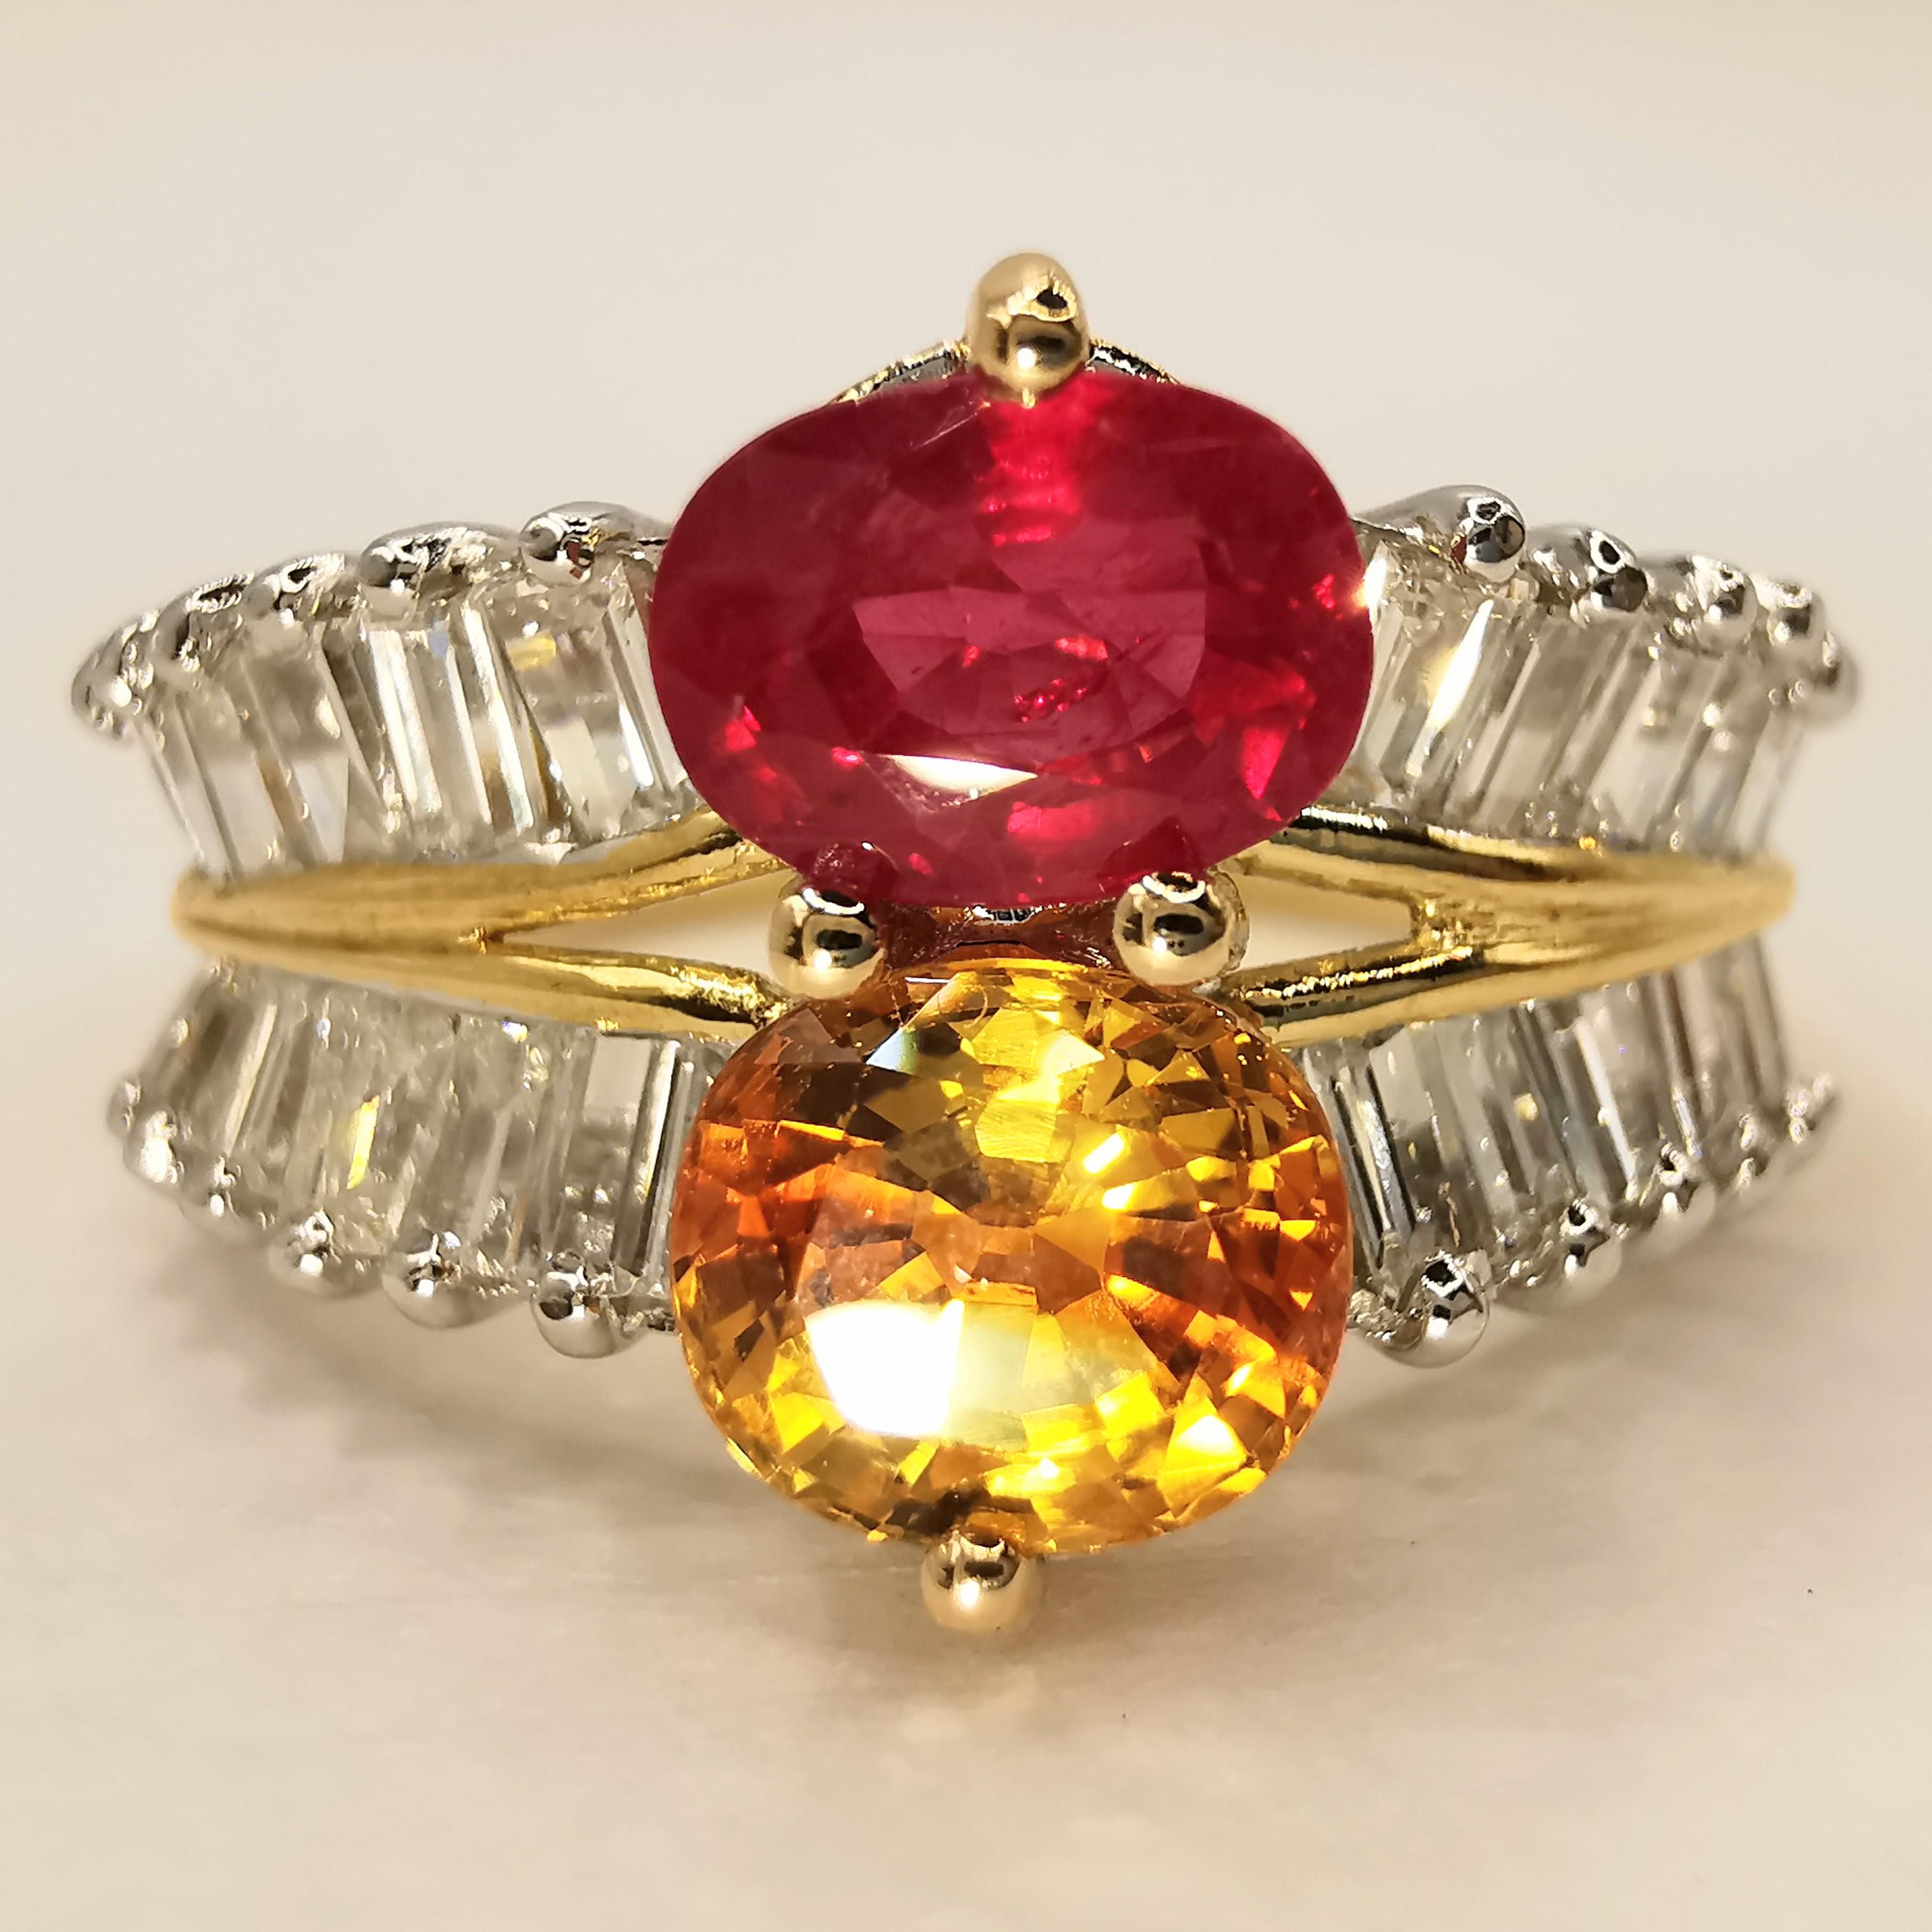 This vintage two-stone diamond ring is truly a work of art. The two stunning oval-cut gemstones at the center of the ring are the real show-stoppers. The vibrant red ruby weighing 0.79 carats and the brilliant golden citrine weighing 1.02 carats are